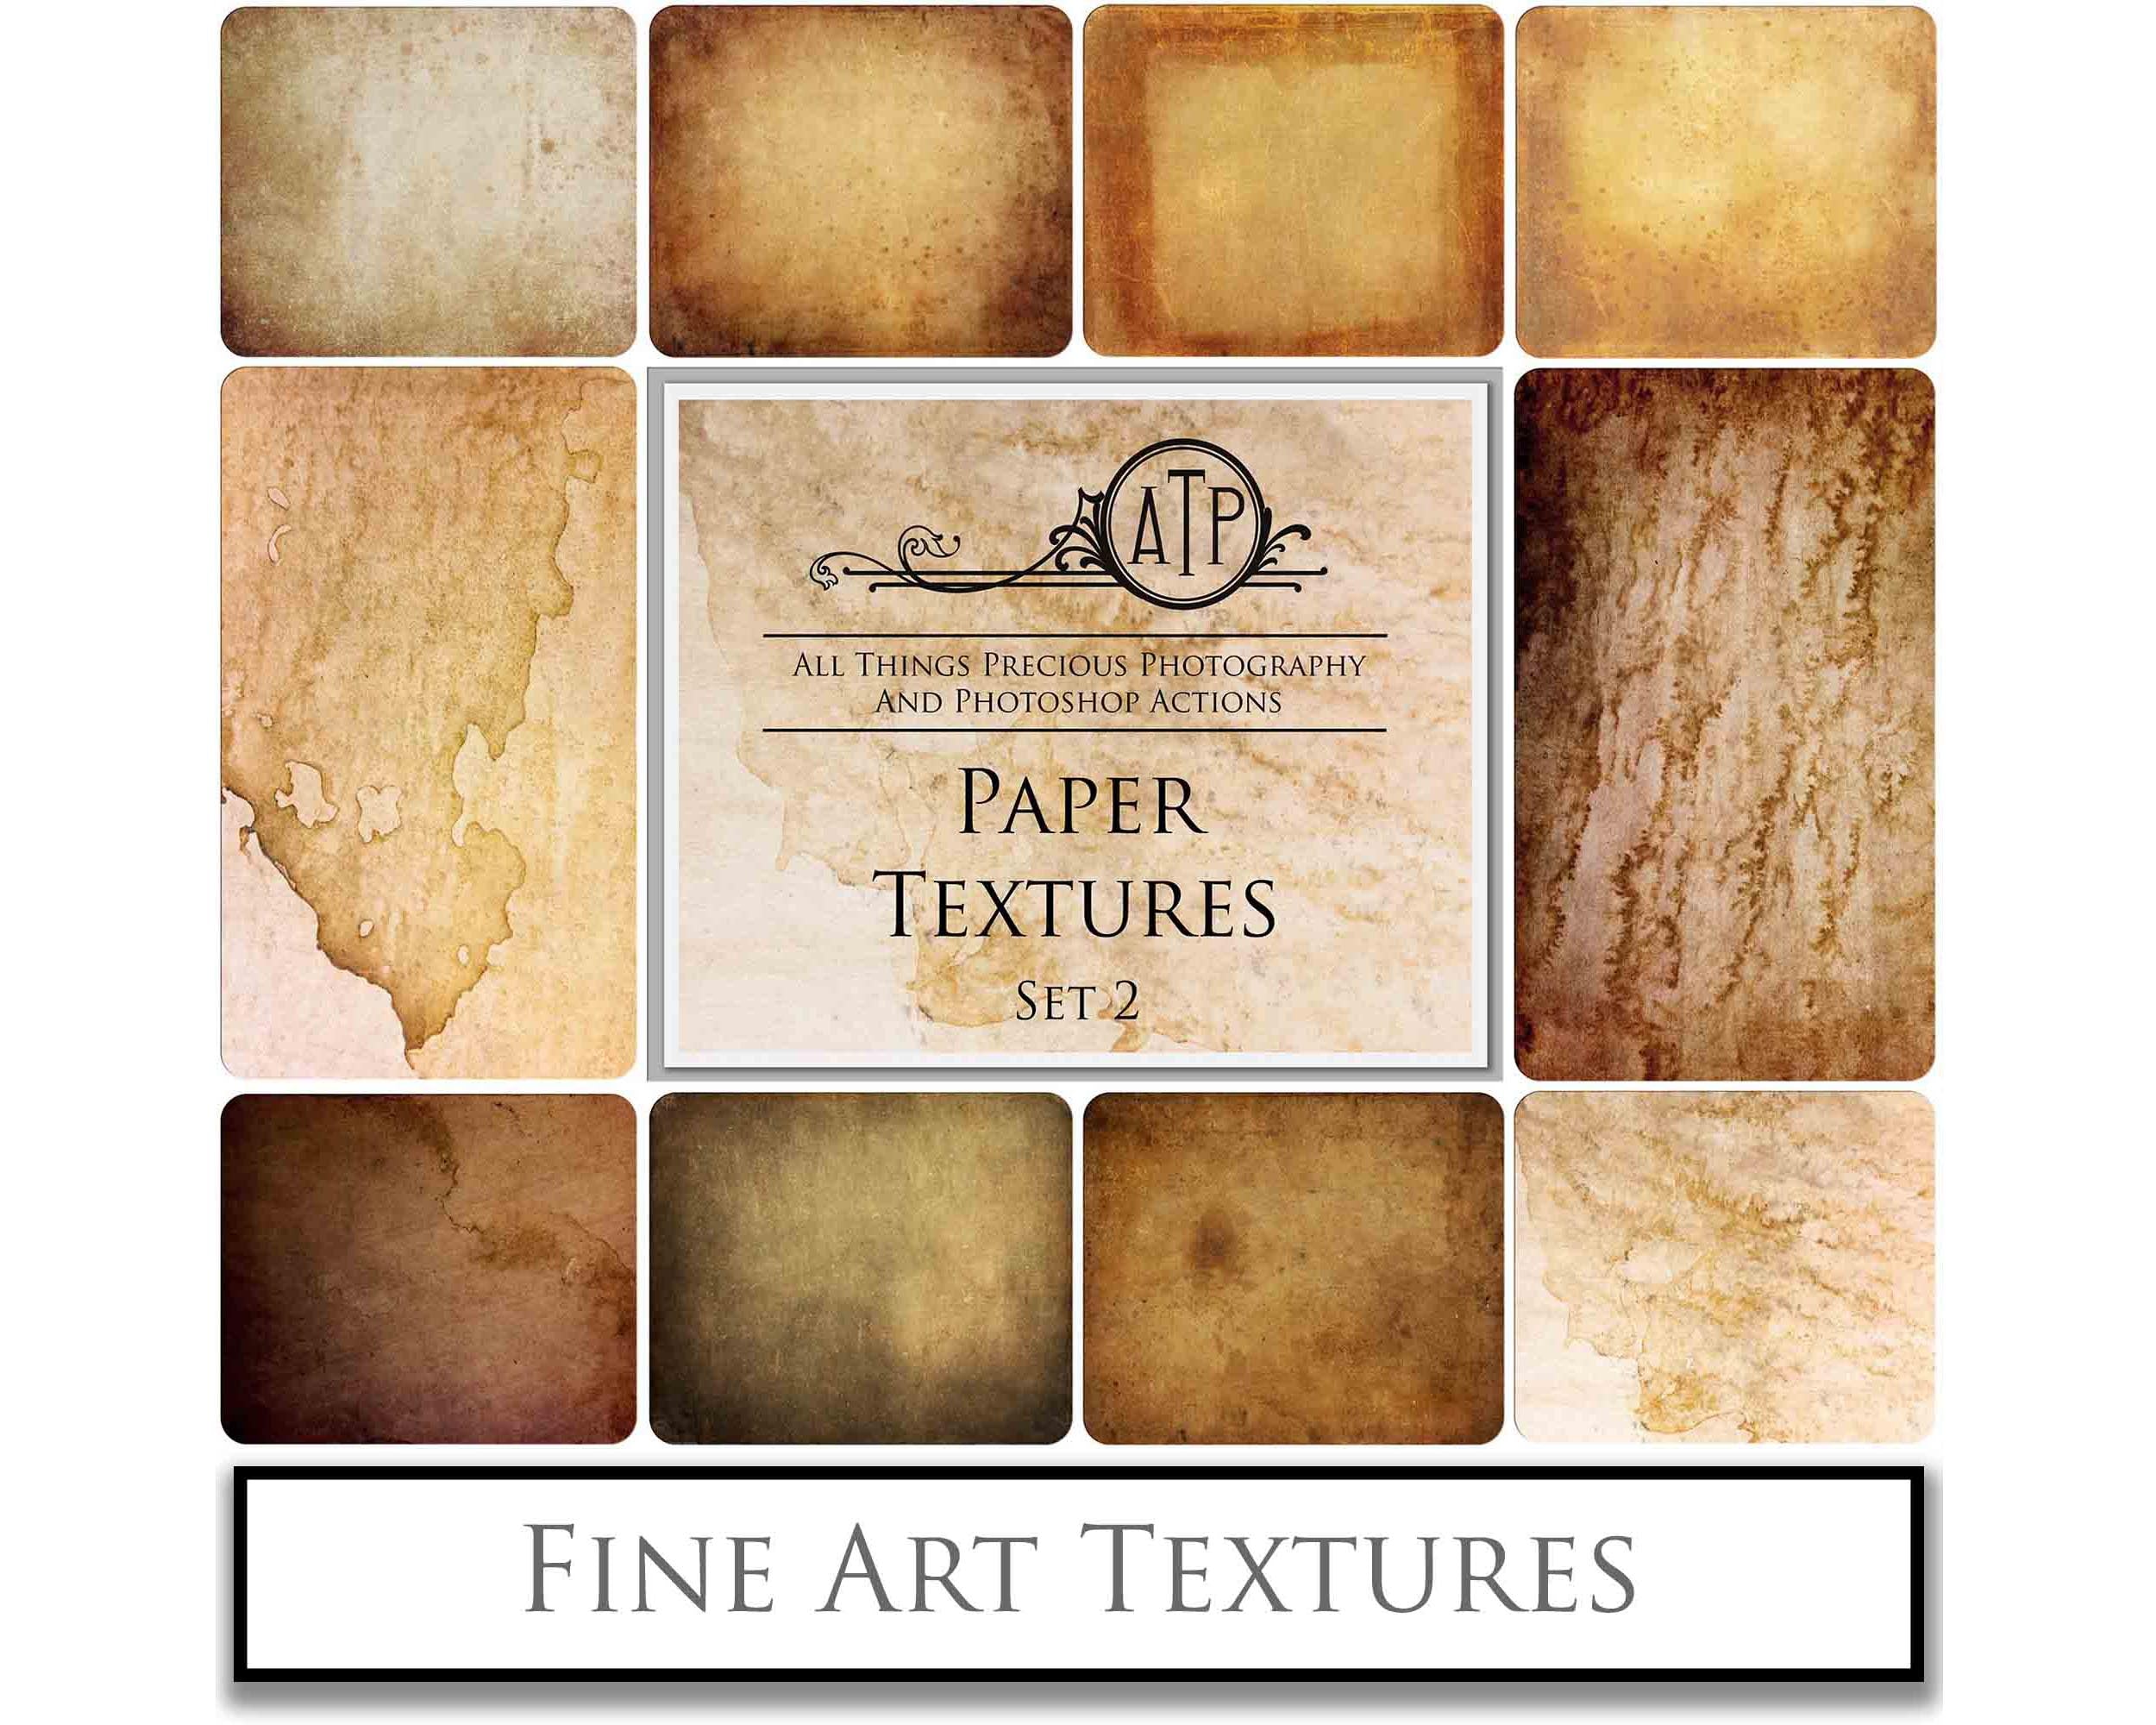 Overlay textures. Fine art texture for photographers, digital editing. Photo Overlays. Antique, Vintage, Grunge, Light, Dark Bundle. Textured printable Canvas, Colour, black and white, Bundle. High resolution, 300dpi Graphic Assets for photography, digital scrapbooking and design. By ATP Textures